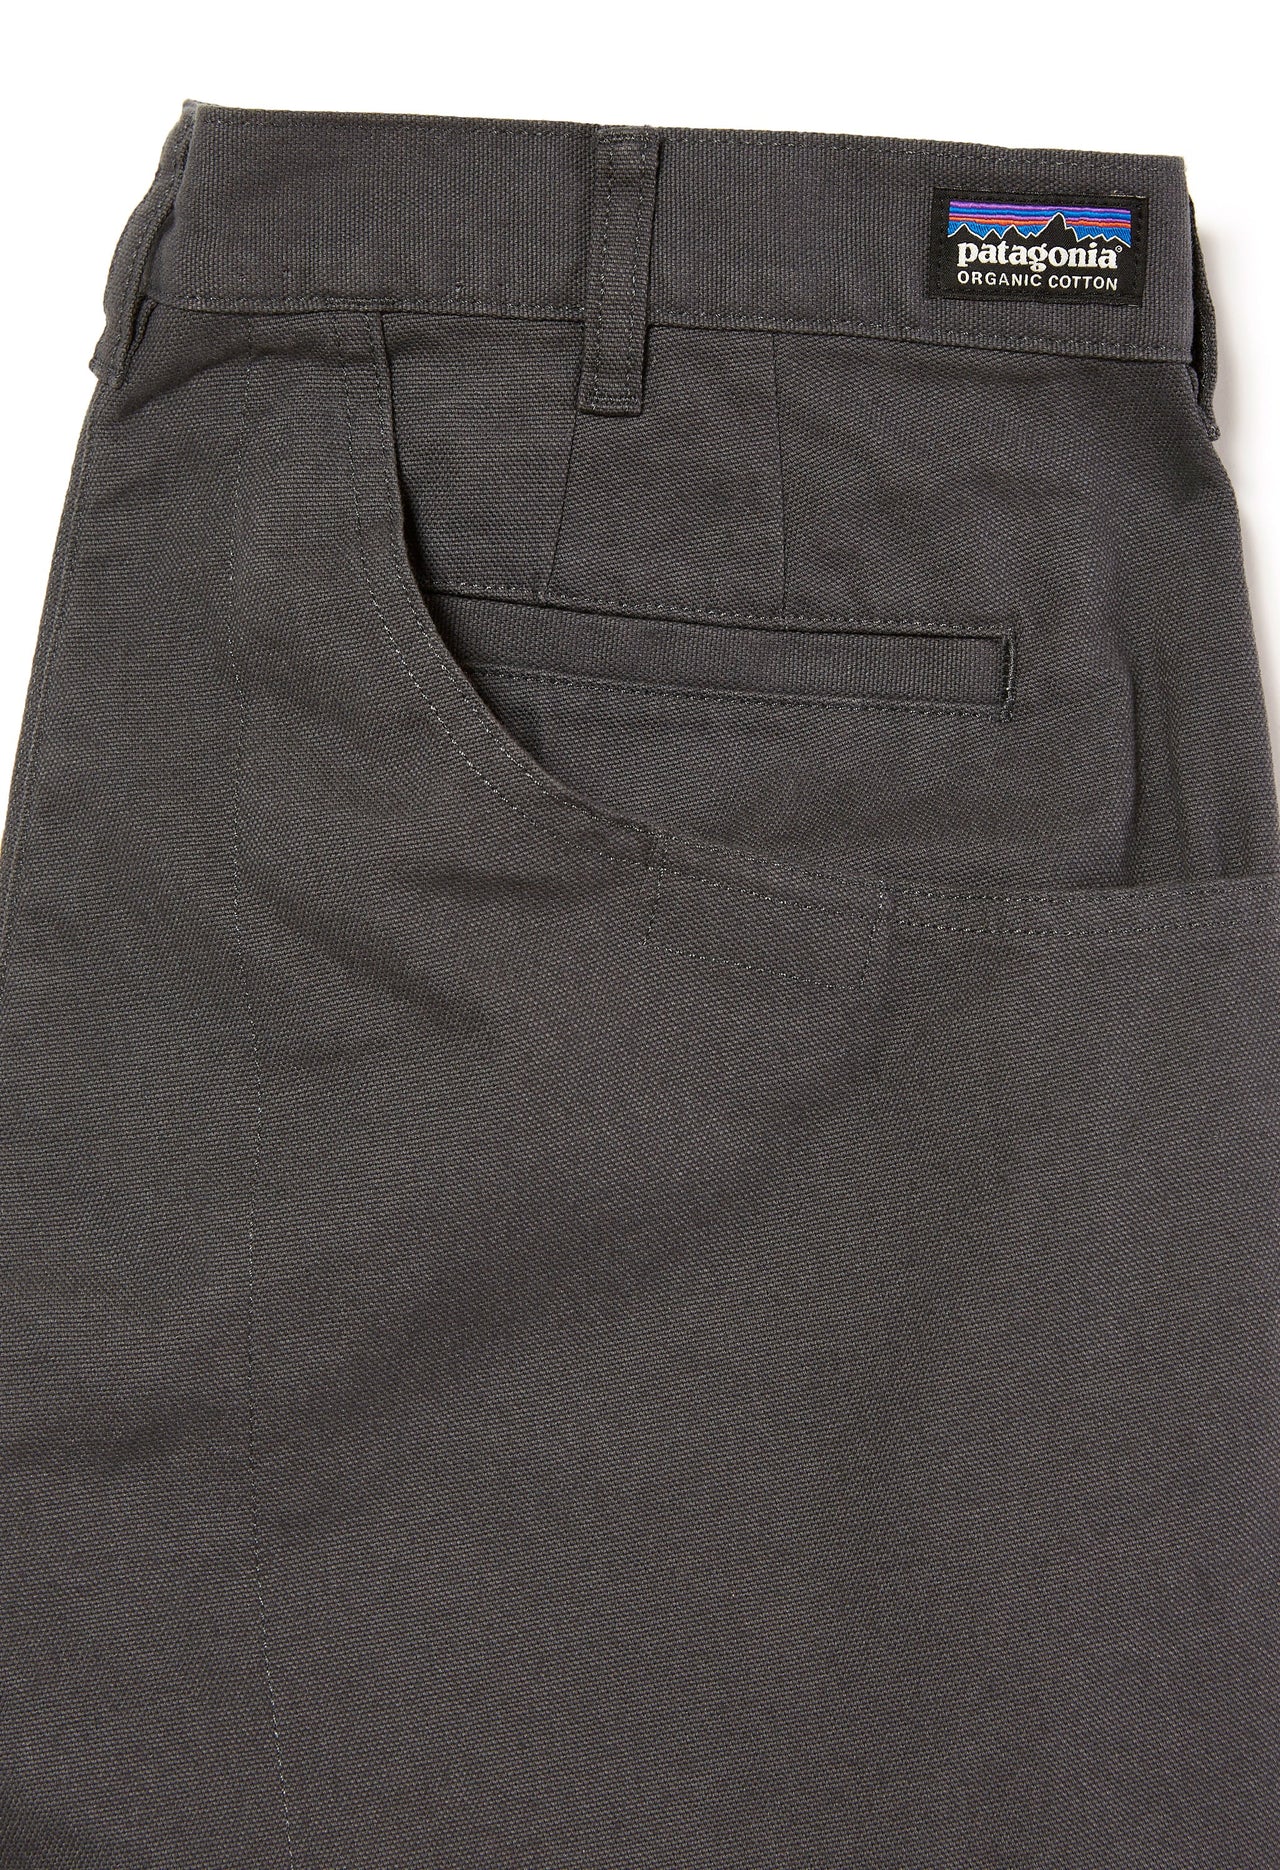 Patagonia Stand Up Men's Shorts - Forge Grey